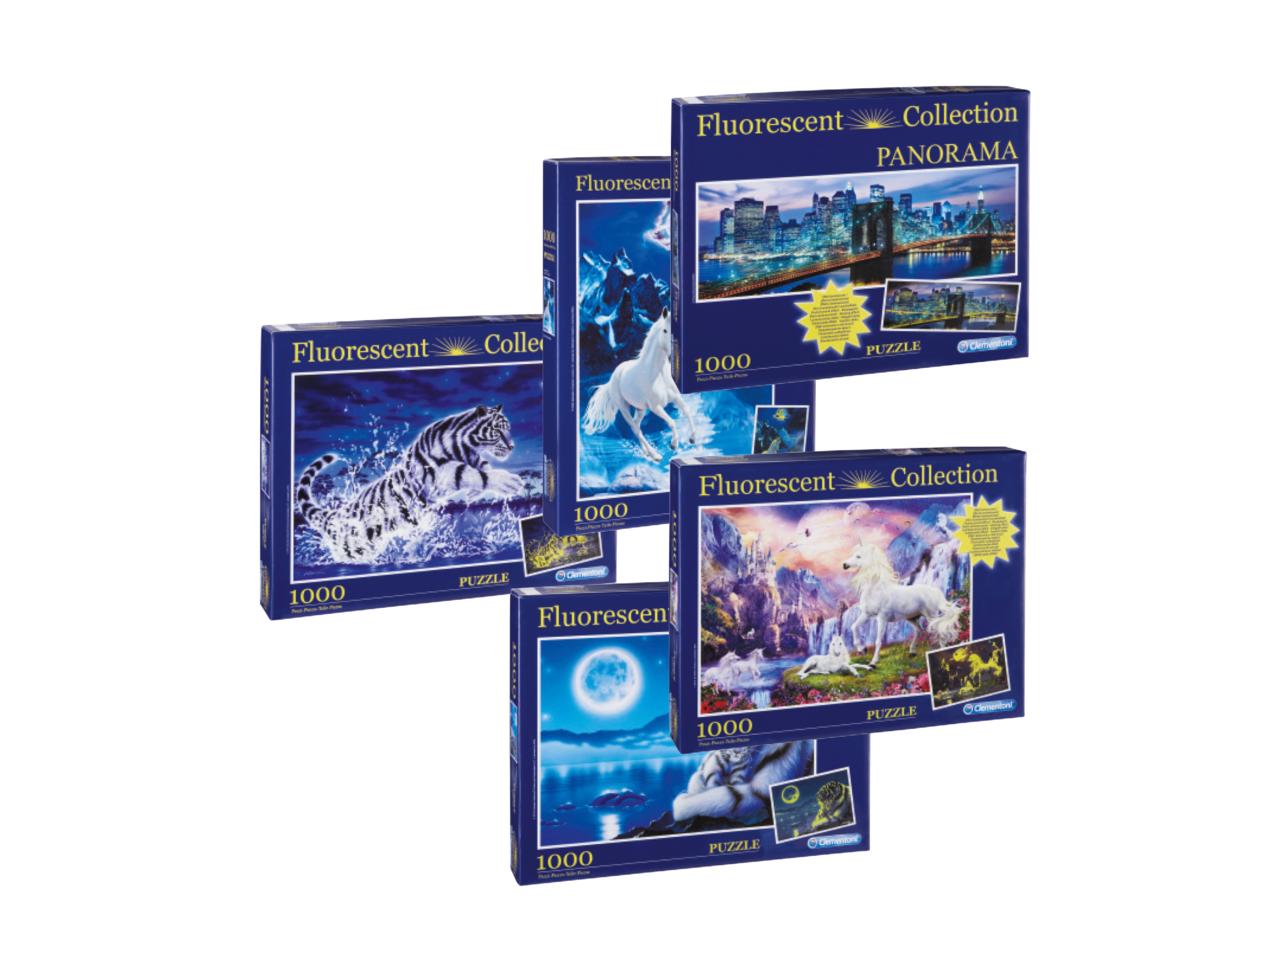 Chromatic cart convergence CLEMENTONI Fluorescent Puzzle - Lidl — Northern Ireland - Specials archive